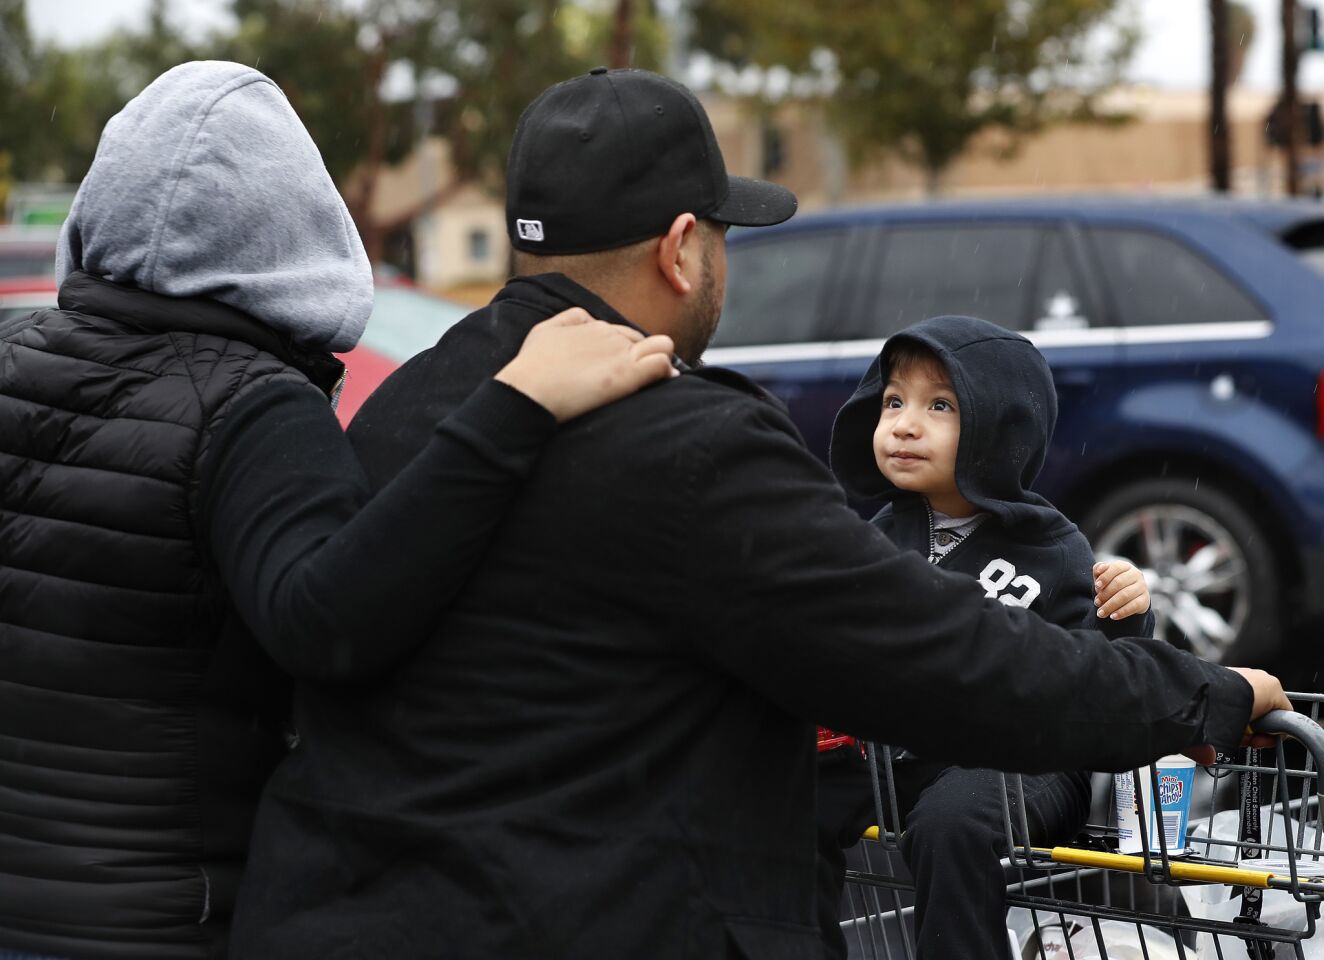 From left, Abby Neri, her husband, Juan, and her son, Damian, cover up from the rain while heading to their car after shopping at a Food4Less store in Panorama City.